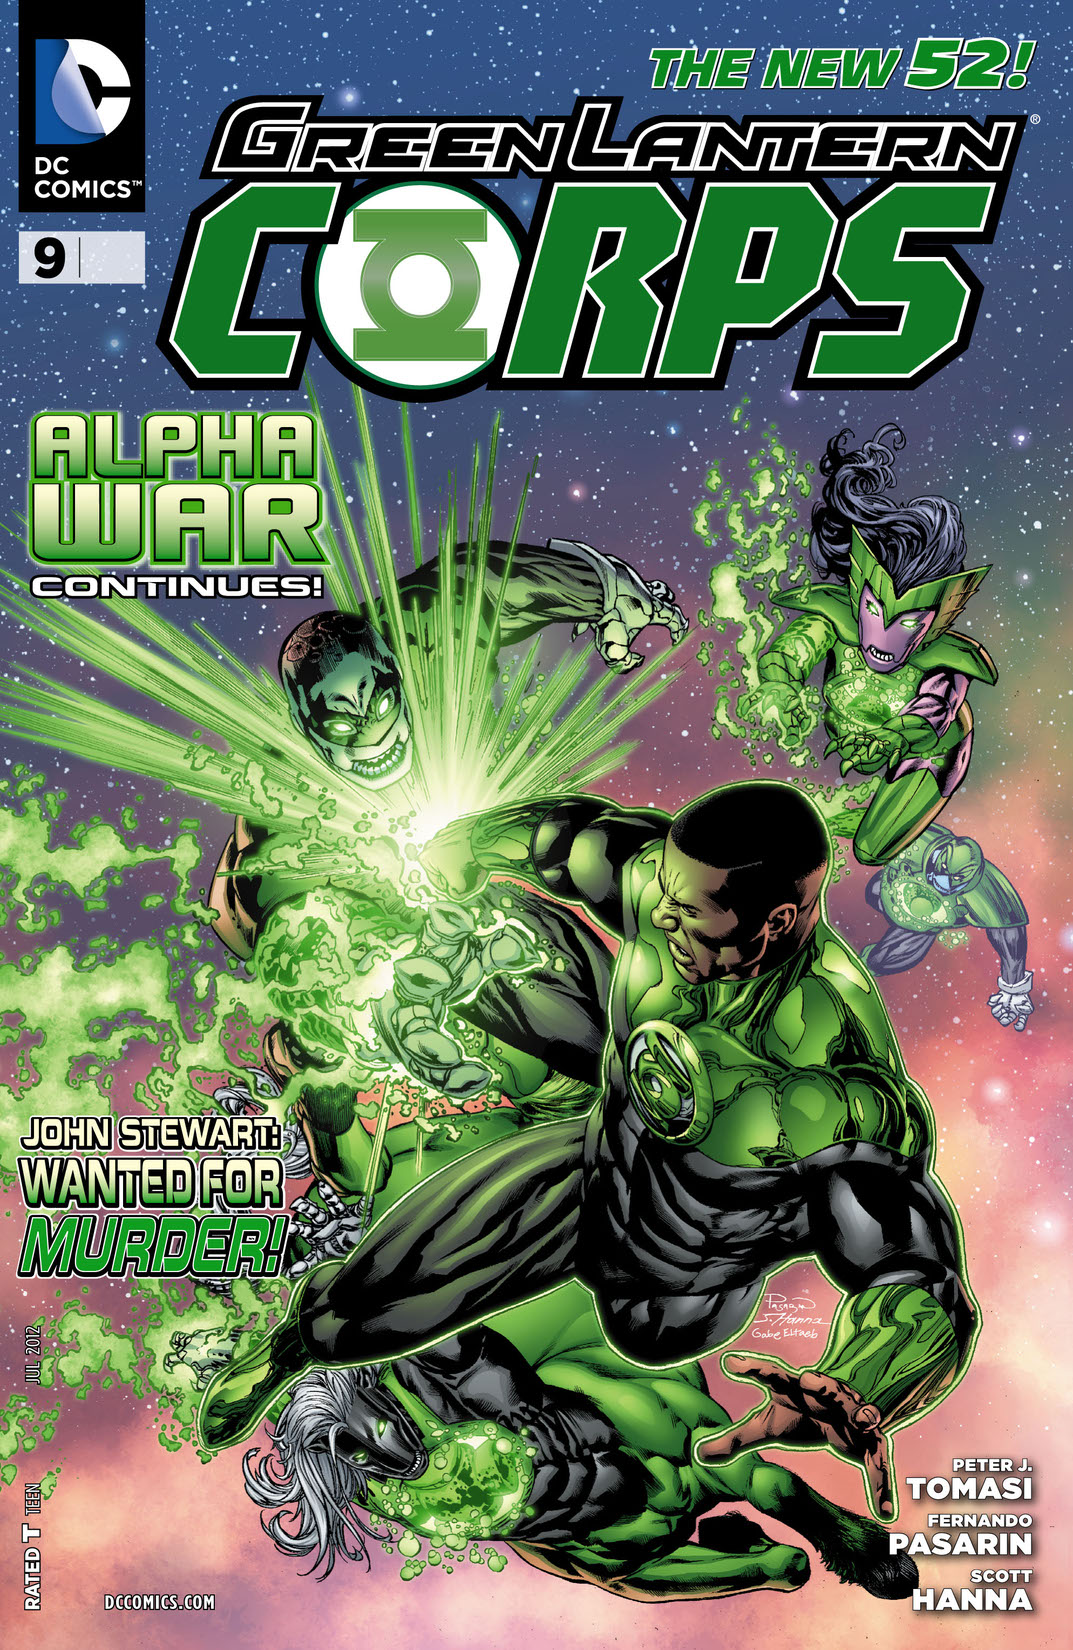 Green Lantern Corps (2011-) #9 preview images